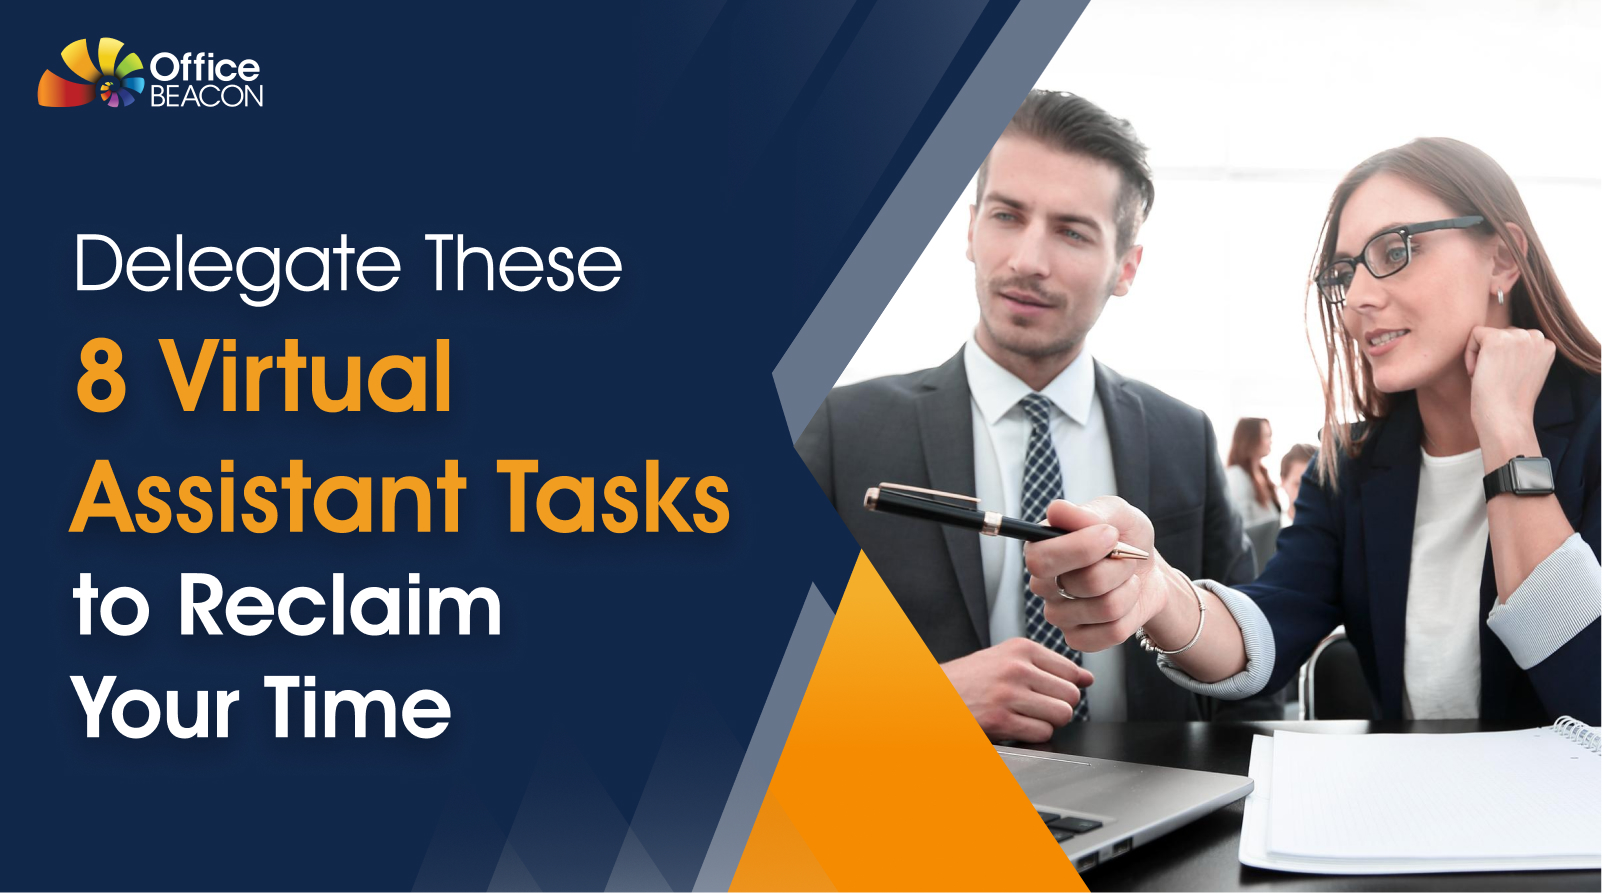 Delegate These 8 Virtual Assistant Tasks to Reclaim Your Time